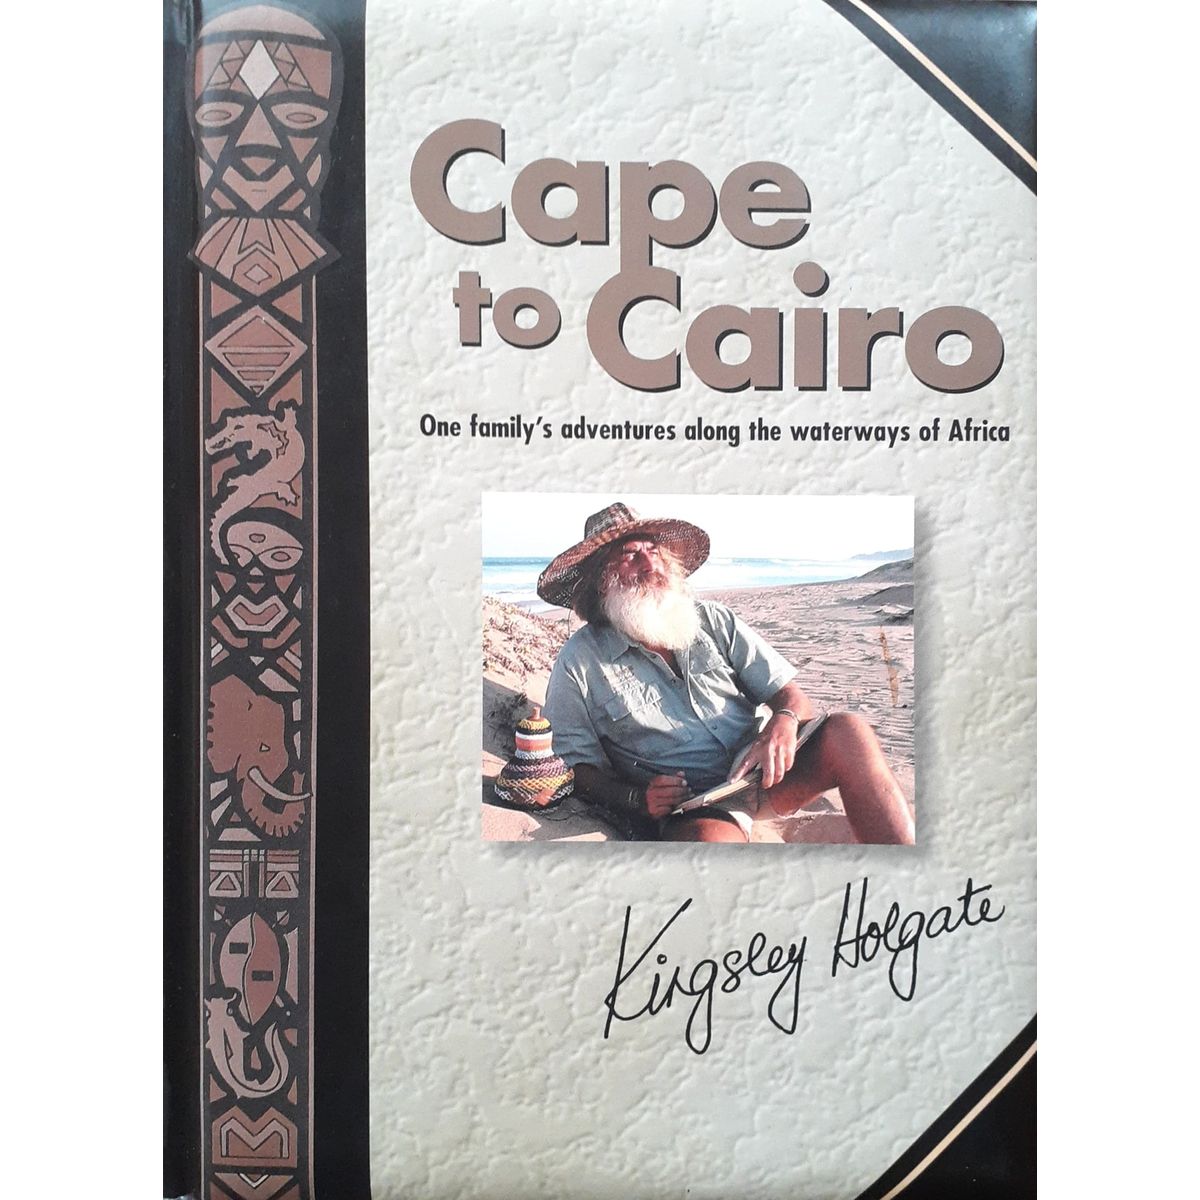 ISBN: 9781868726943 / 1868726940 - Cape to Cairo: One Family's Adventures Along the Waterways of Africa by Kingsley Holgate [2002]